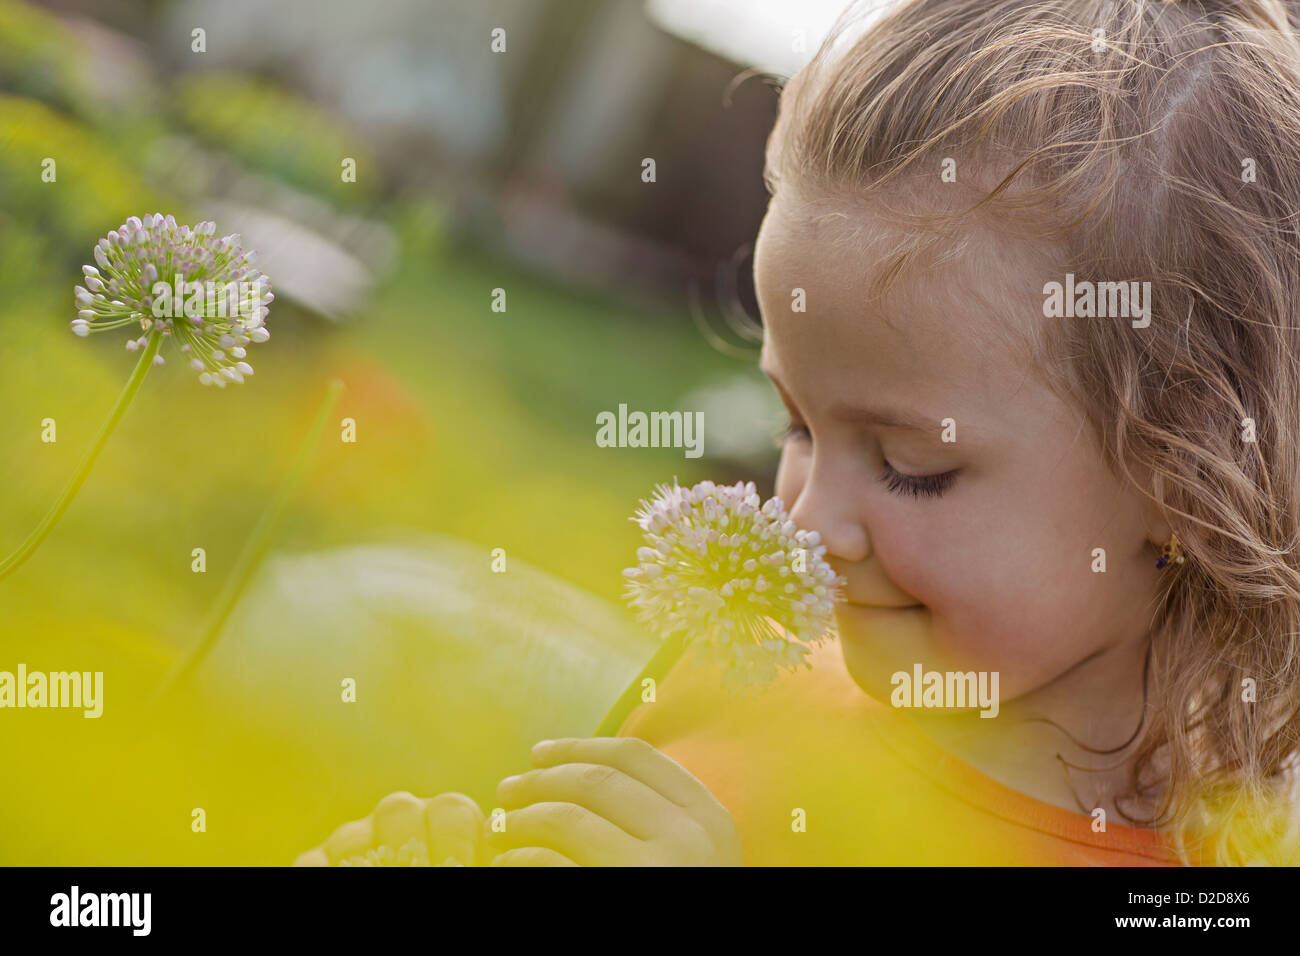 A young smiling girl smelling a flower Stock Photo